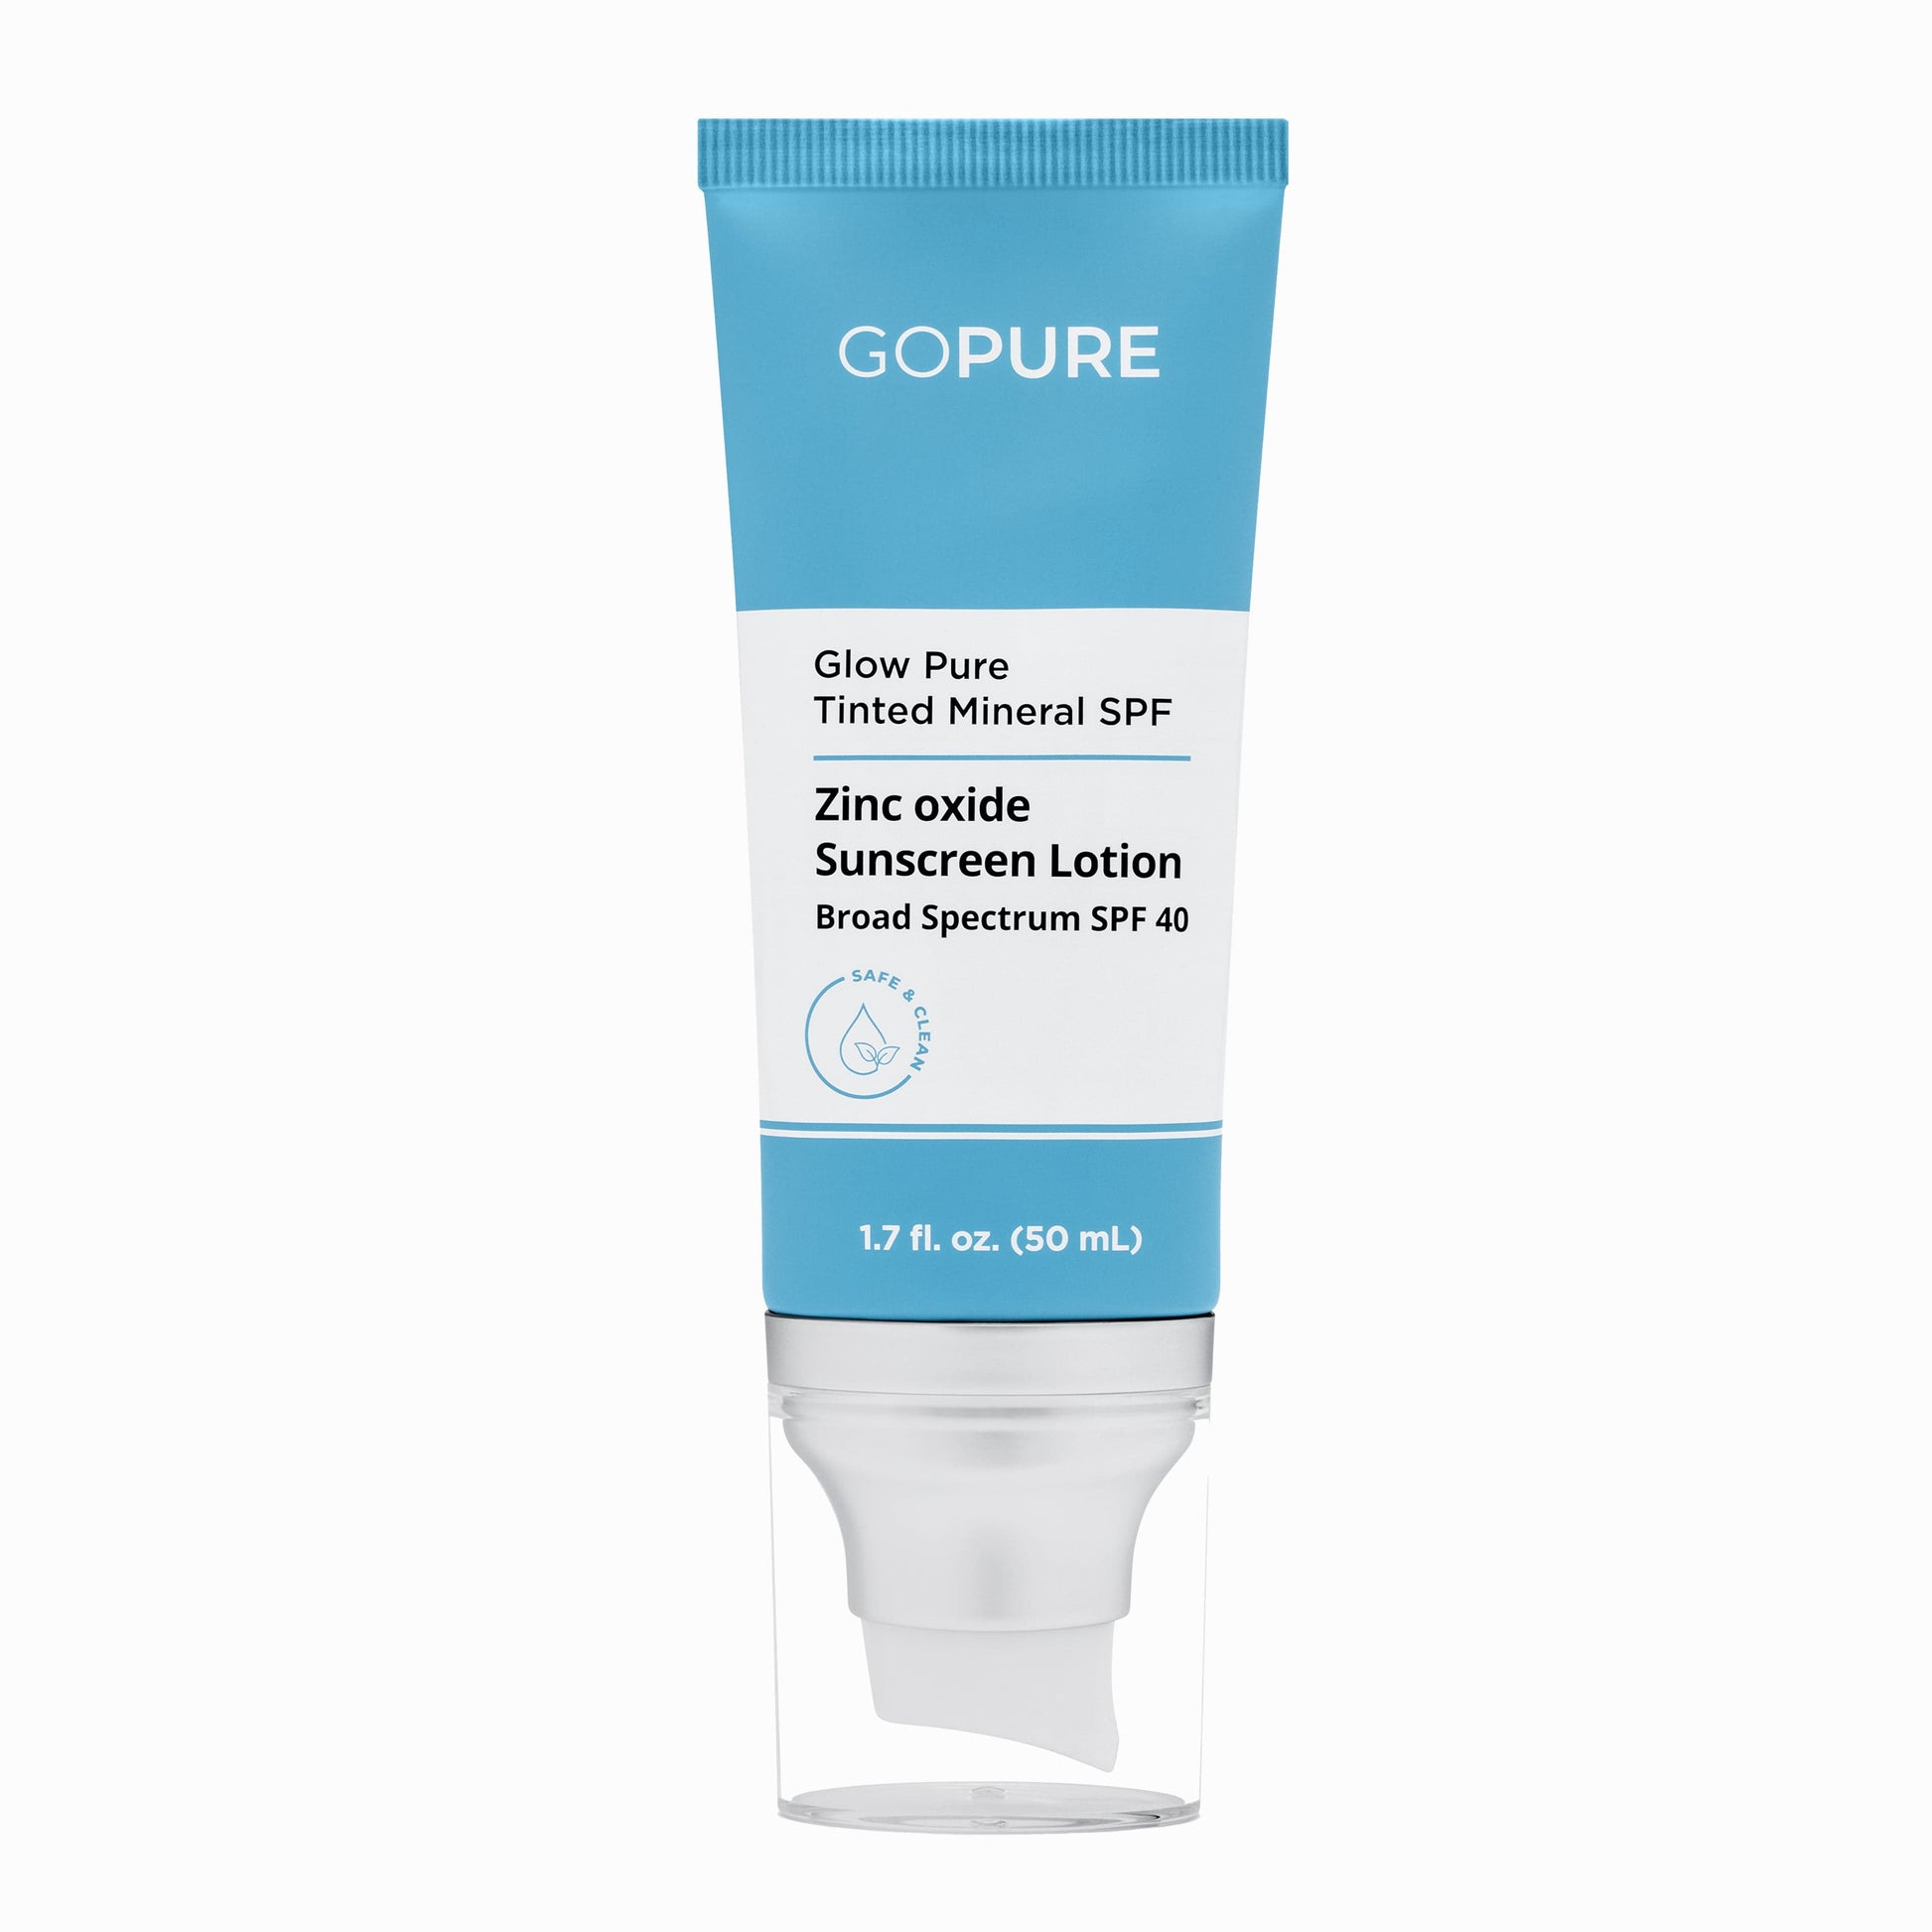  A 1.7 fl. oz. tube of GoPure's Glow Pure Tinted Mineral SPF, containing Zinc Oxide Sunscreen Lotion with Broad Spectrum SPF 40, labeled as safe and clean.